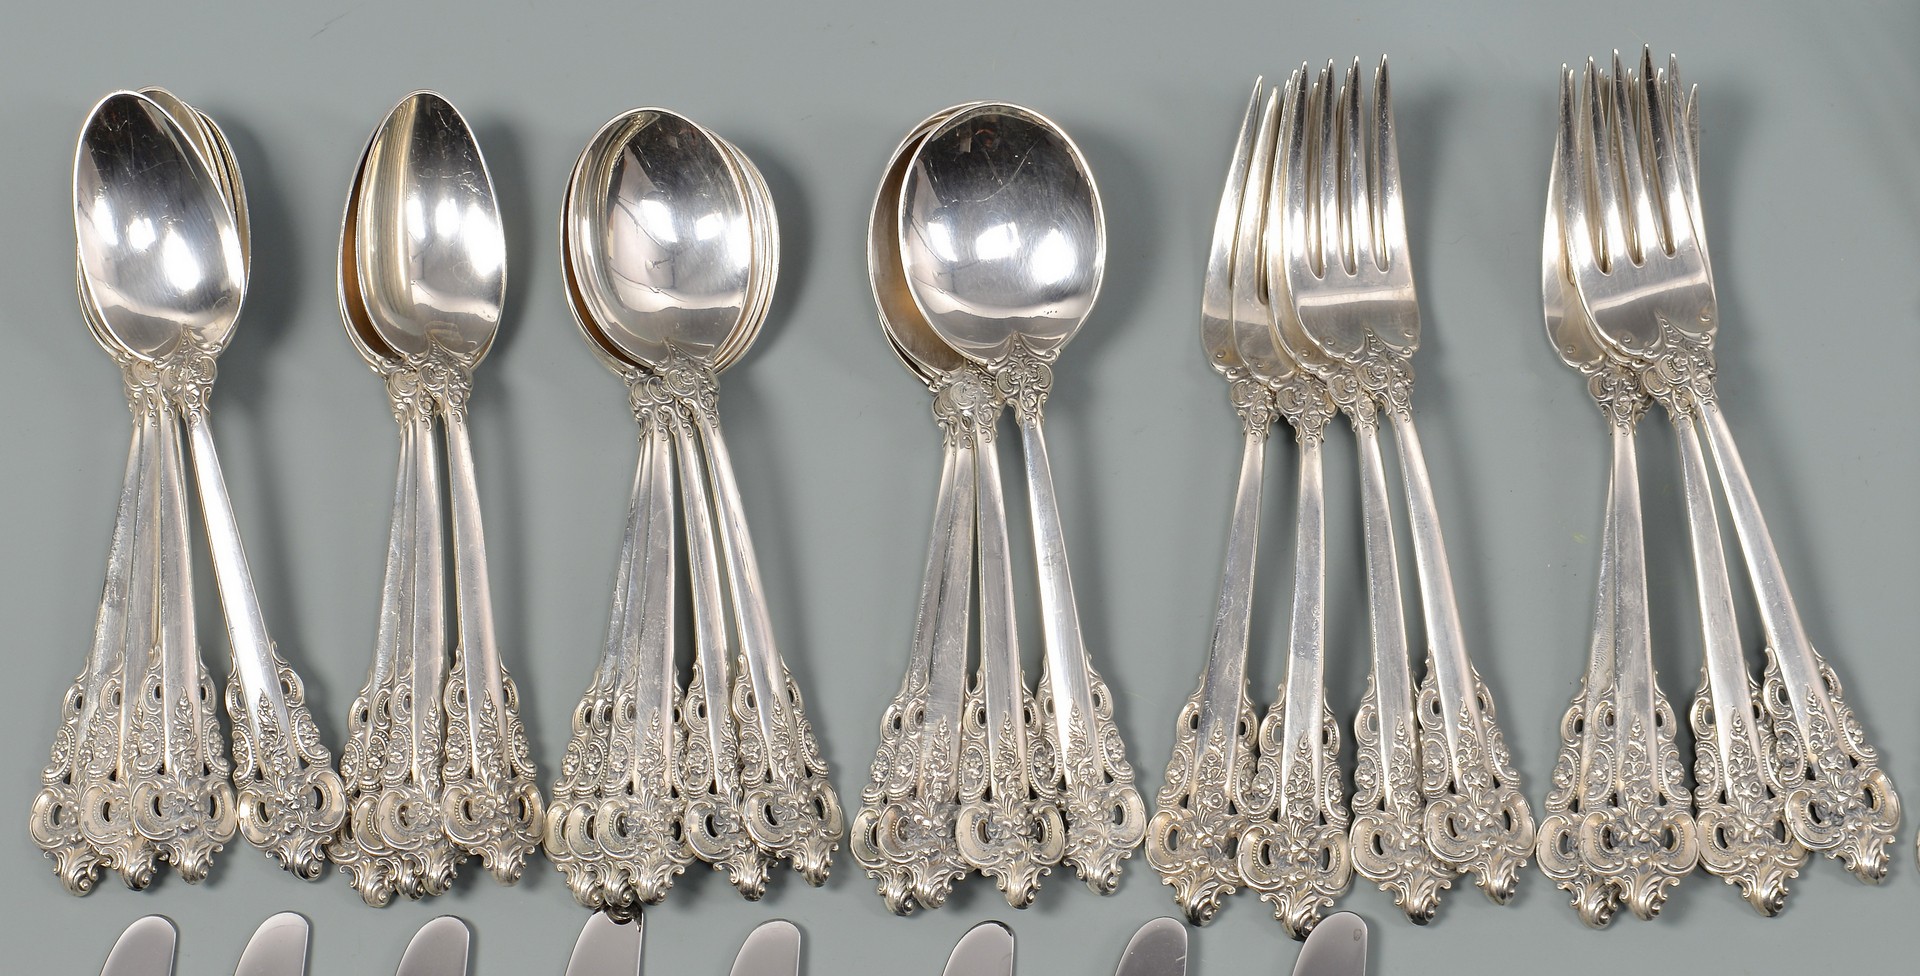 Lot 870: Wallace Grand Baroque Sterling Flatware, 58 pieces